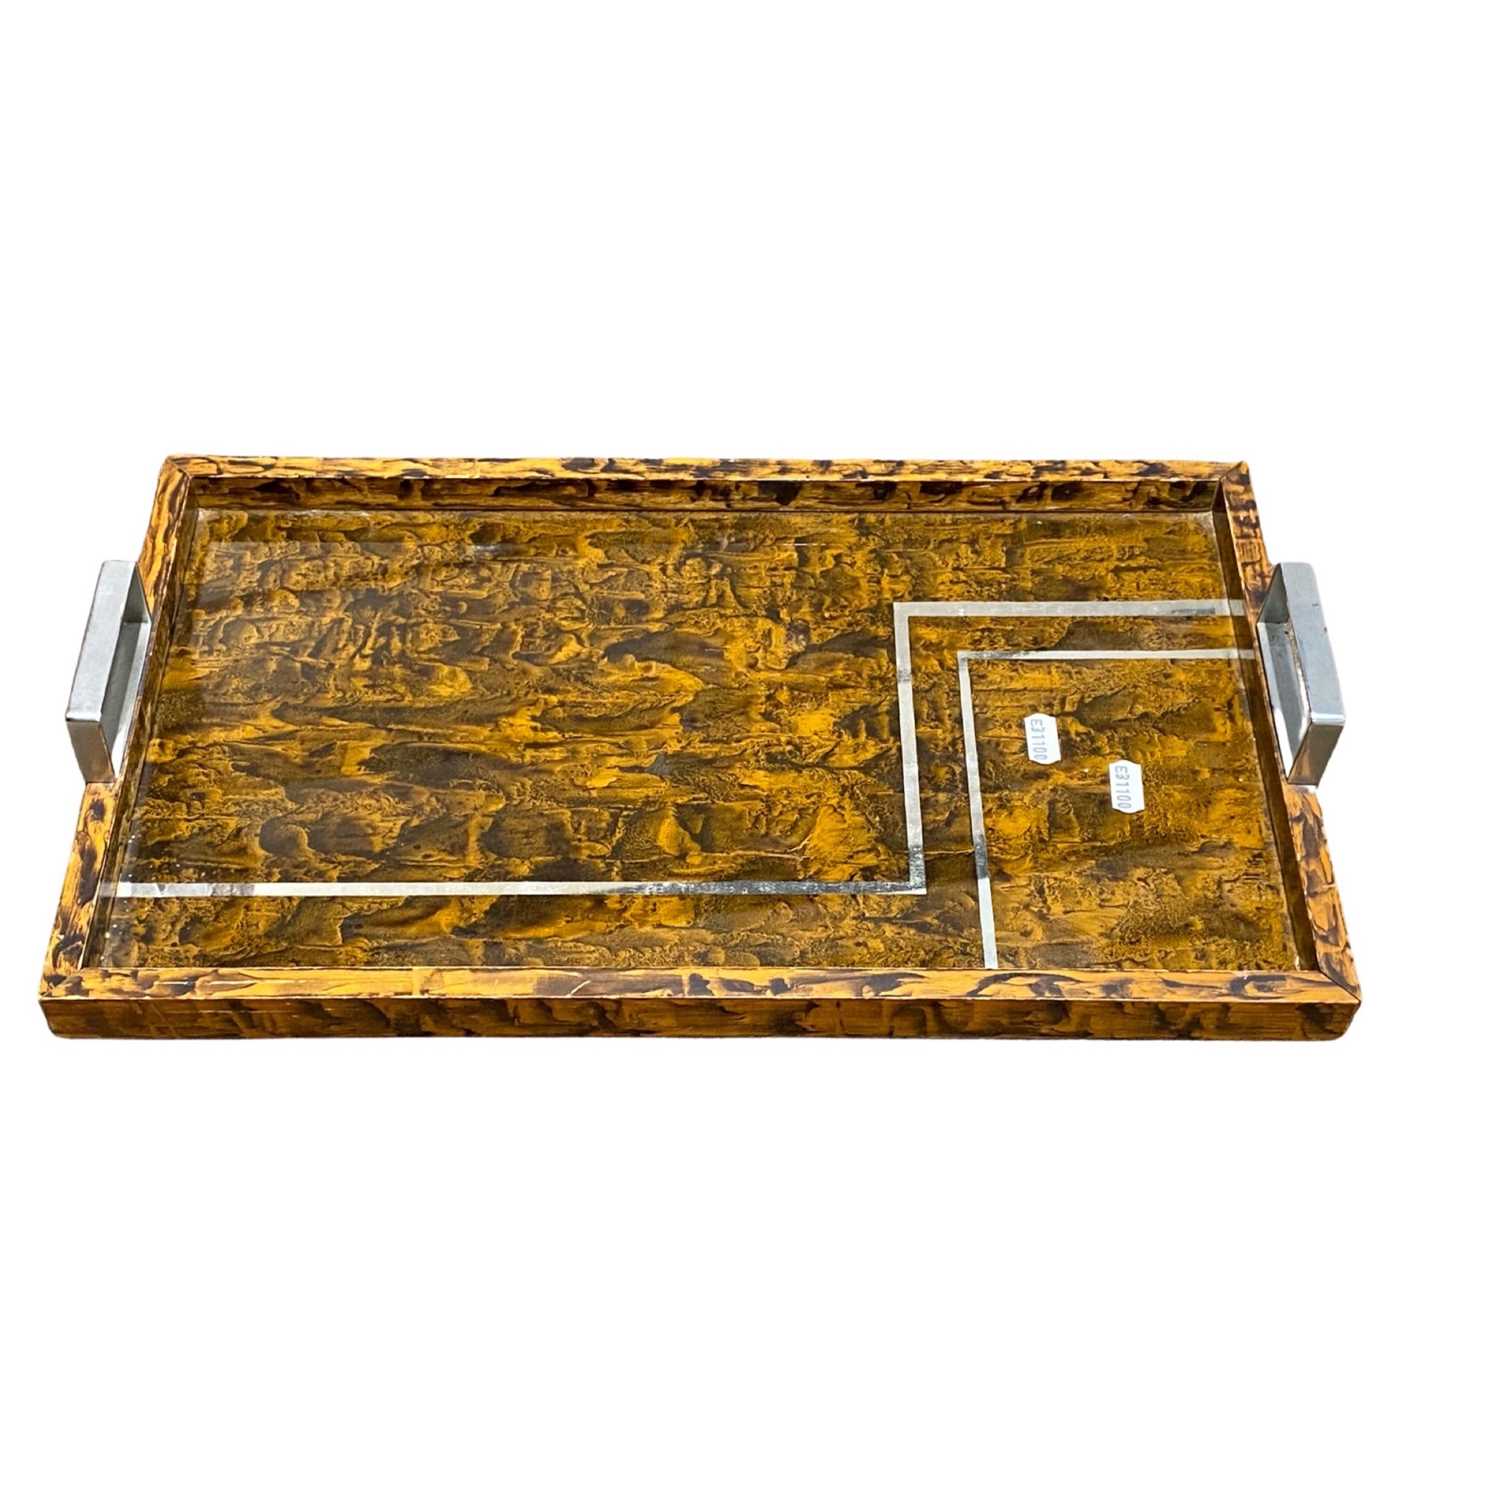 An Art Deco style serving tray with chrome finish handles, 47cm wide - Image 2 of 2